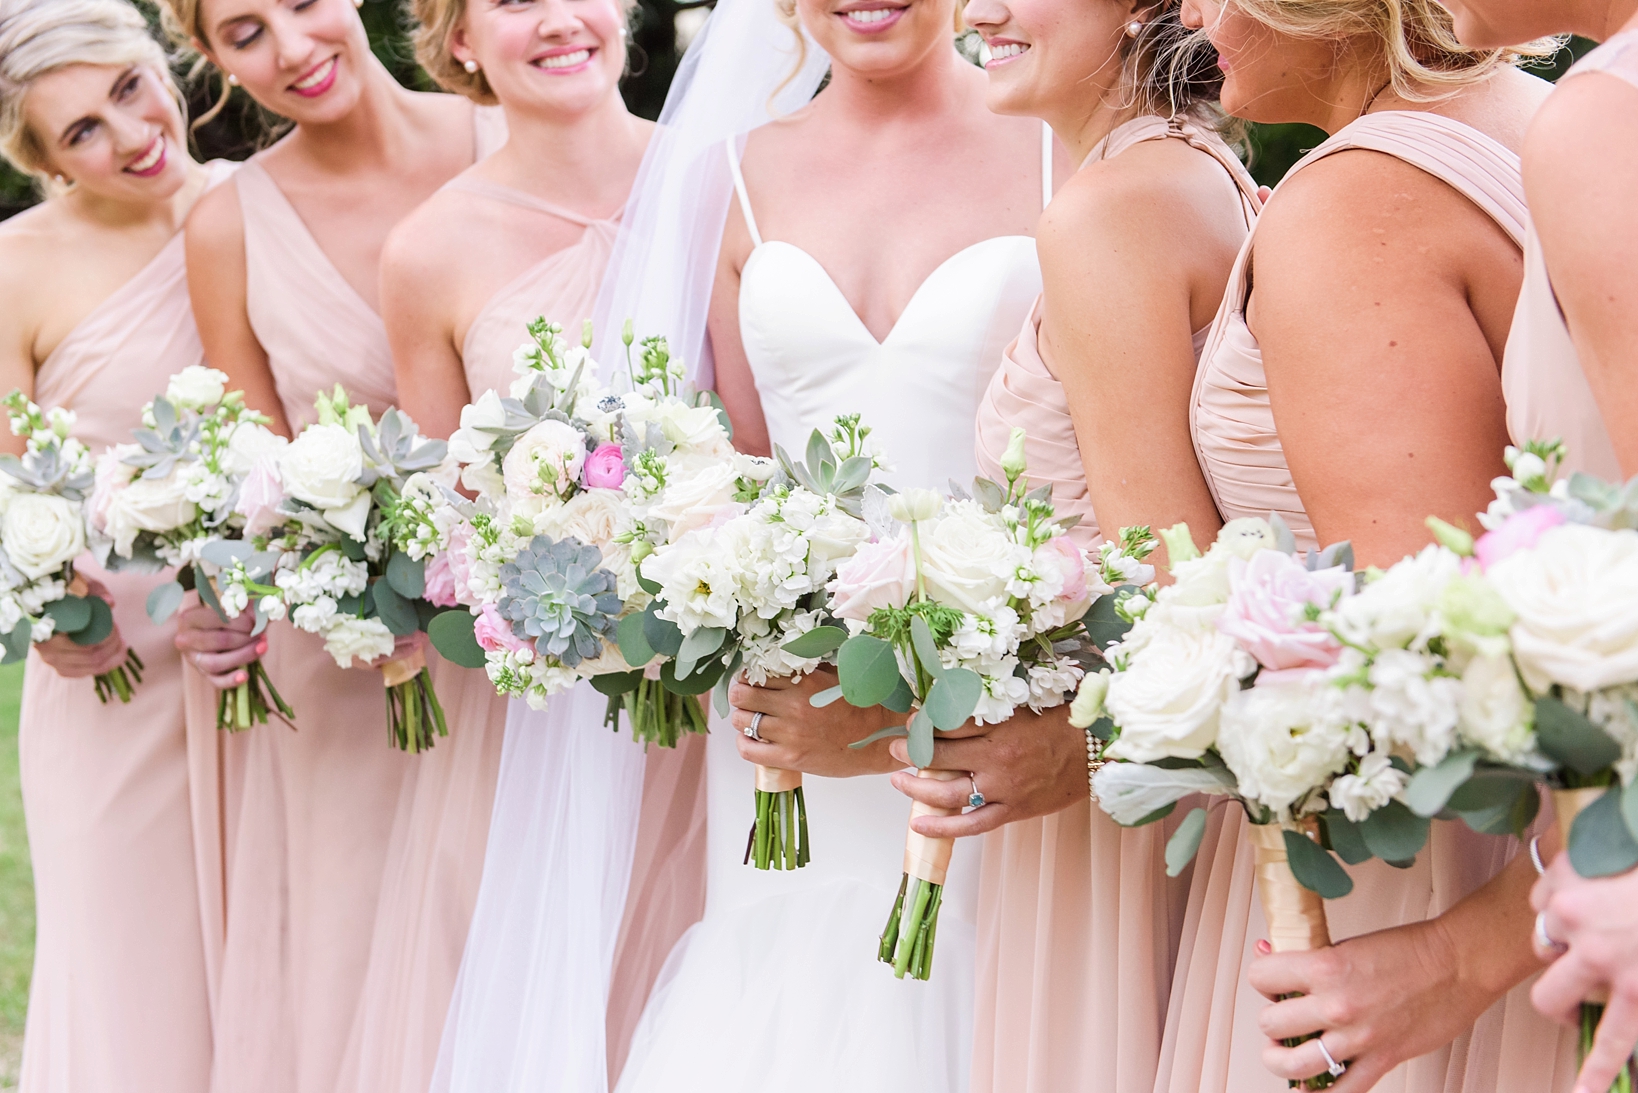 Bridal bouquets against the blush dresses of the bridal party